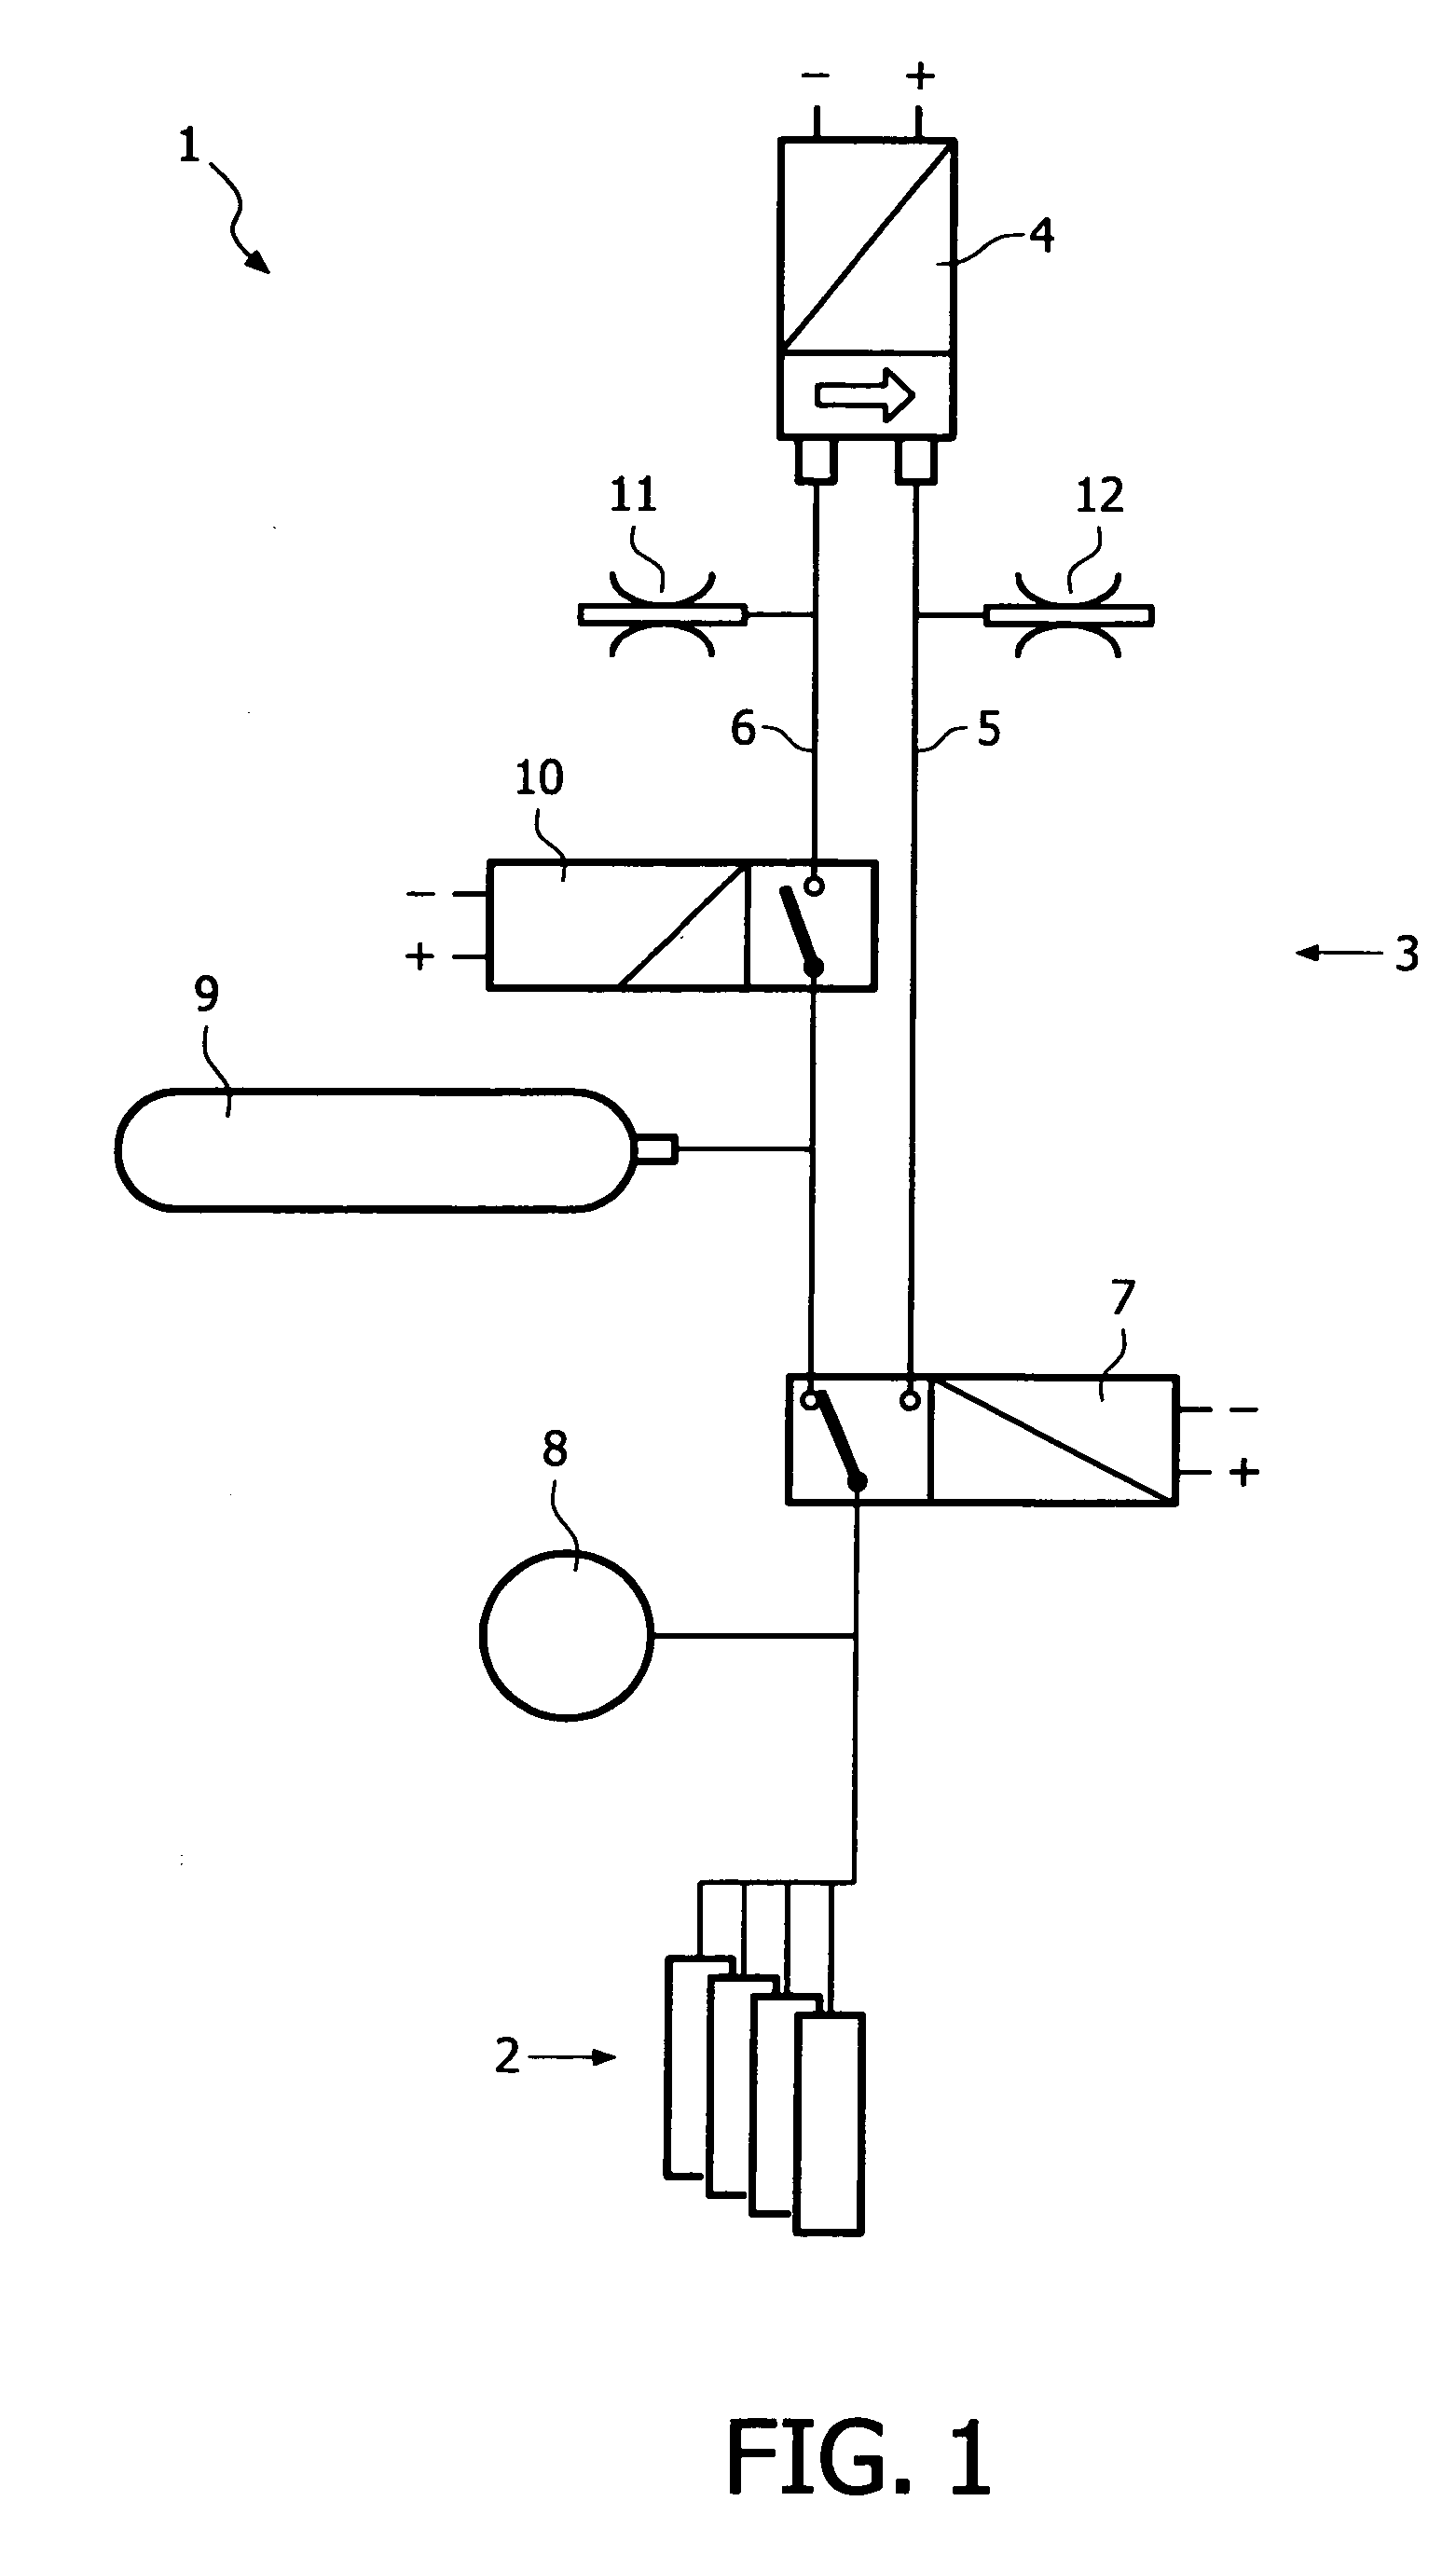 Apparatus and method for controlling the pressure in an ink reservoir of an ink jet printer